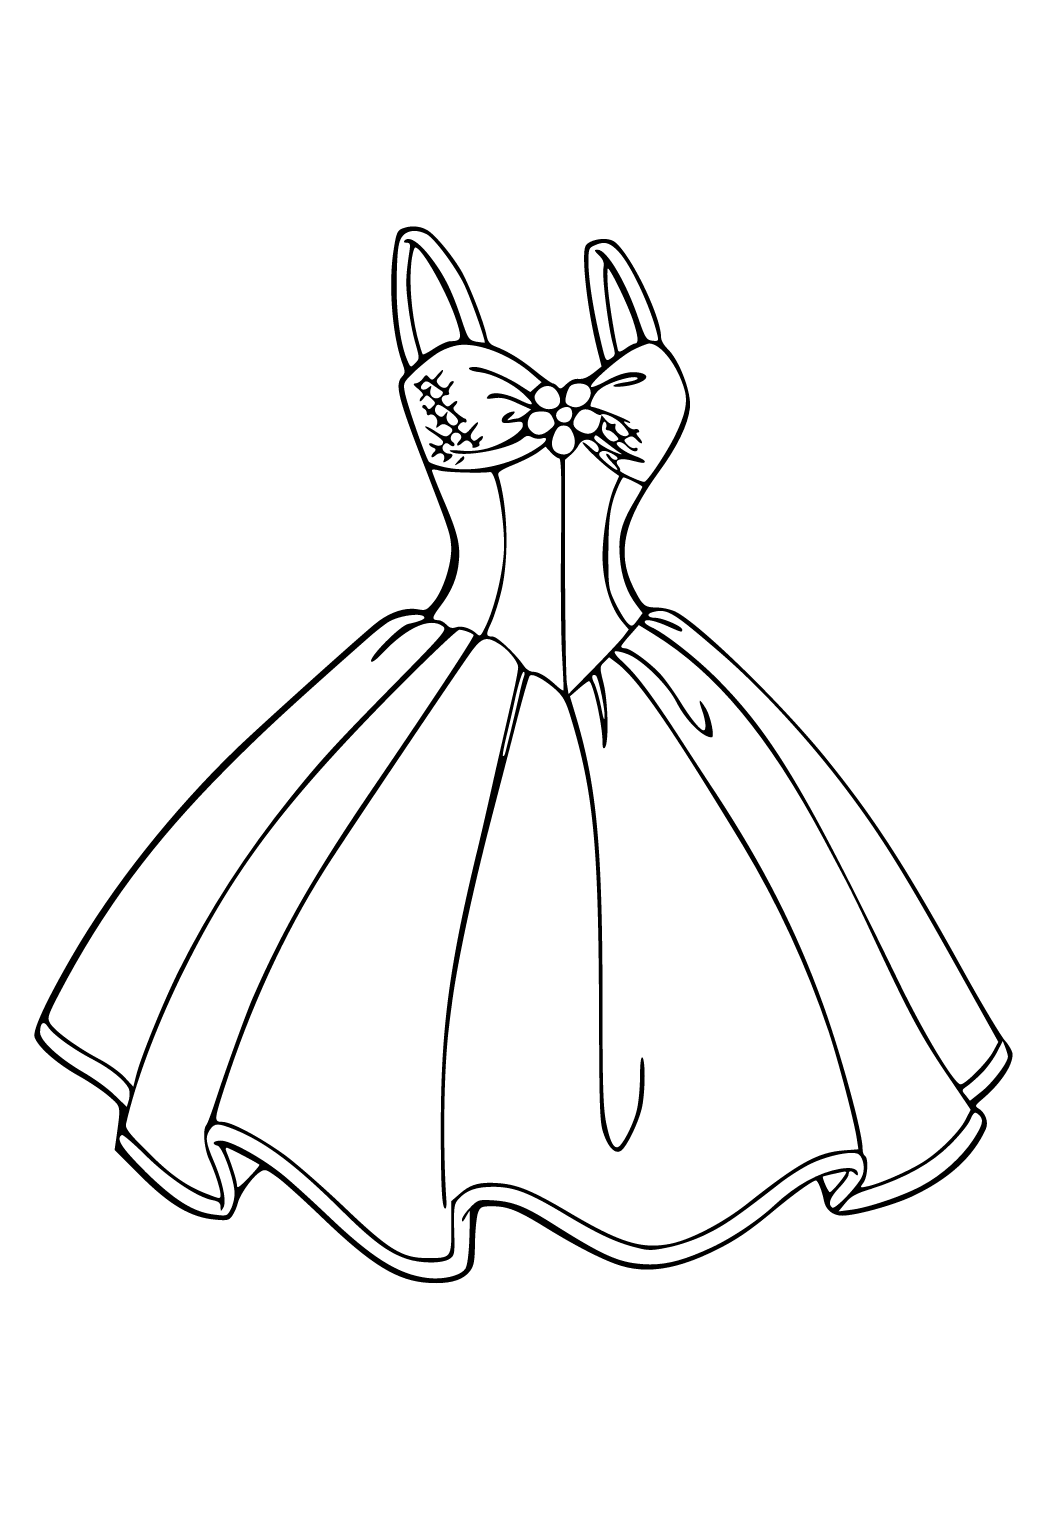 Prom Dress Coloring Pages - Get Coloring Pages